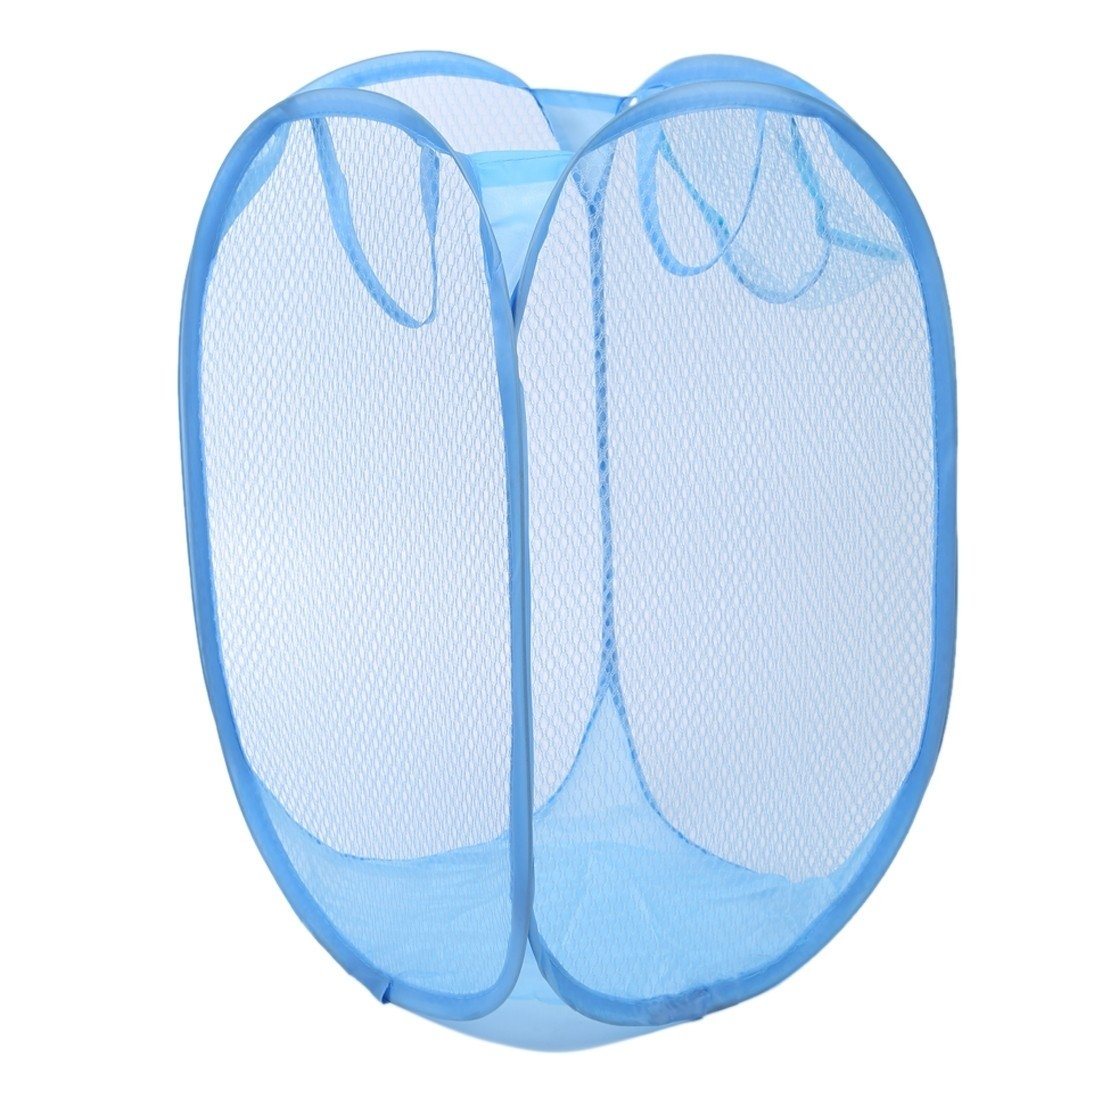 Home Essentials Blue Collapsible Laundry Basket